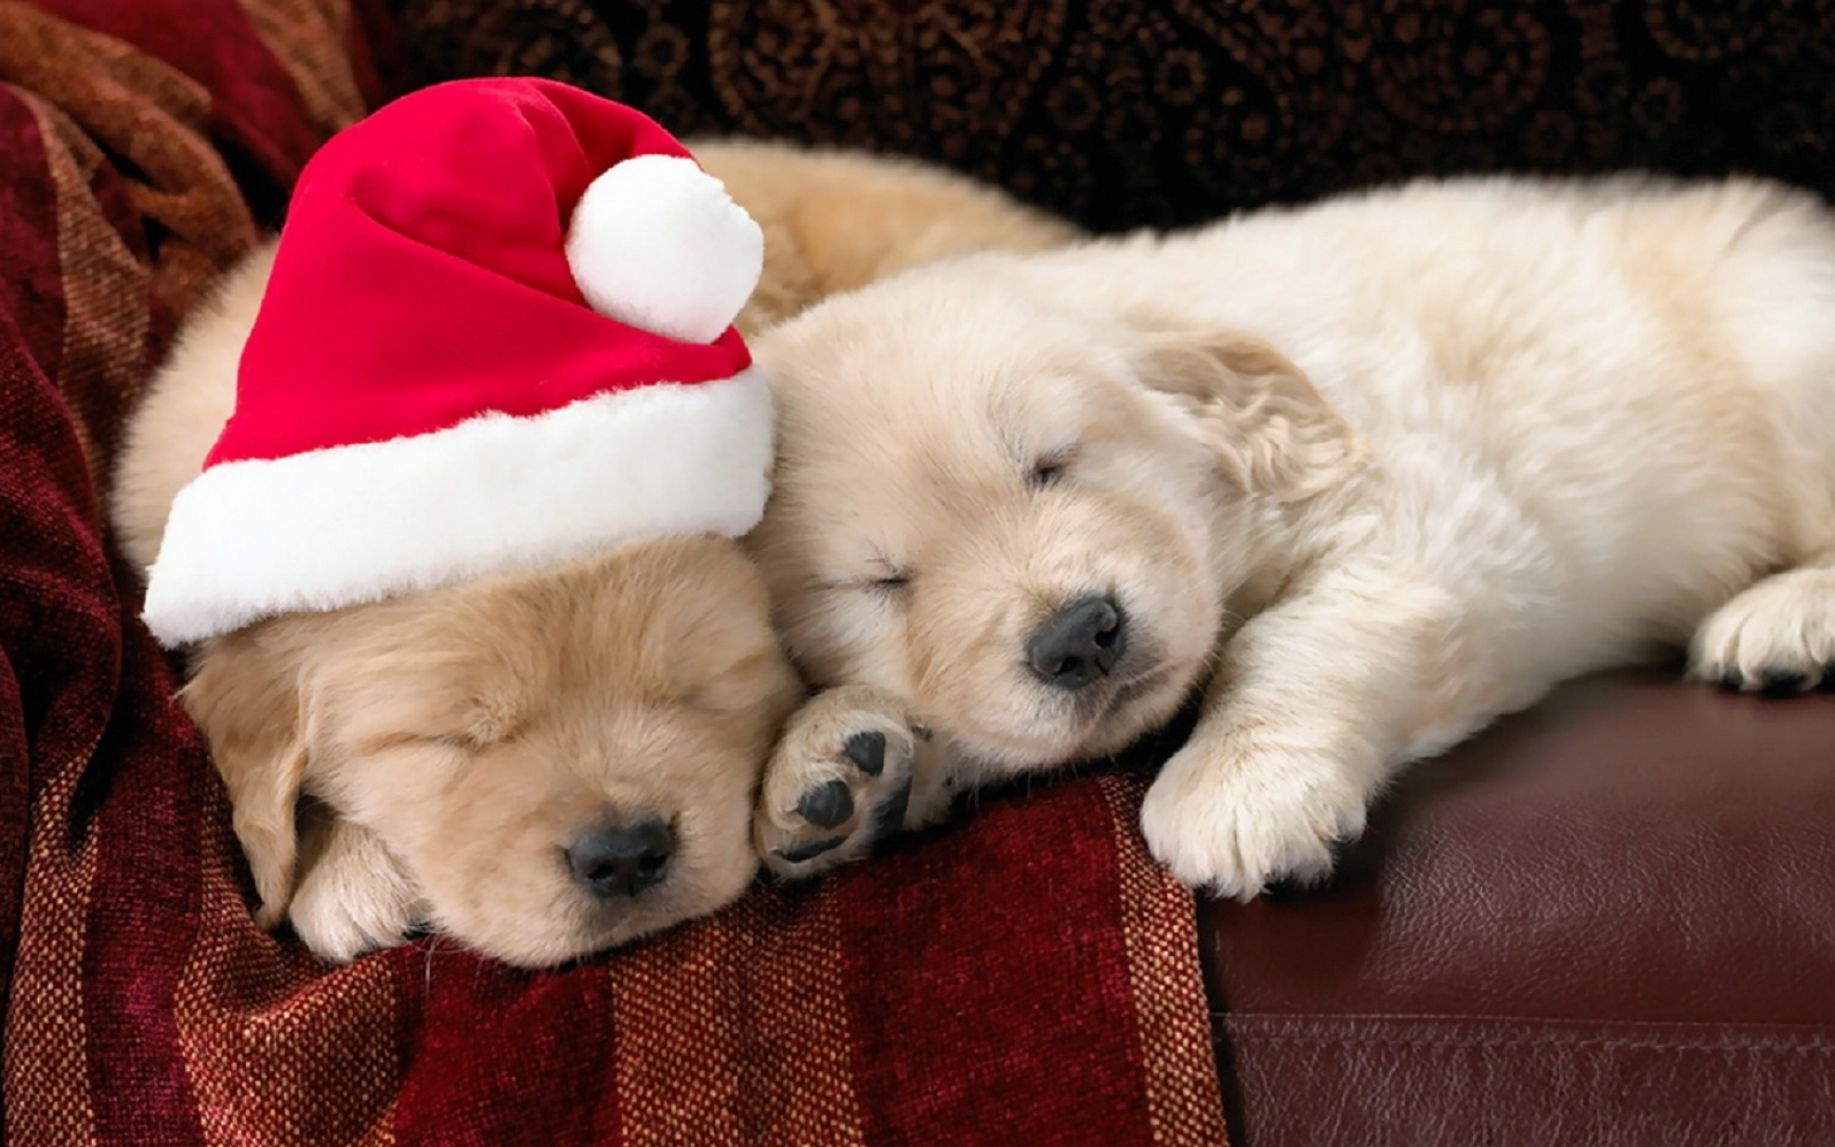 Cute Animal Christmas Wallpaper 10624 Hd Wallpapers in Celebrations 1835x1147